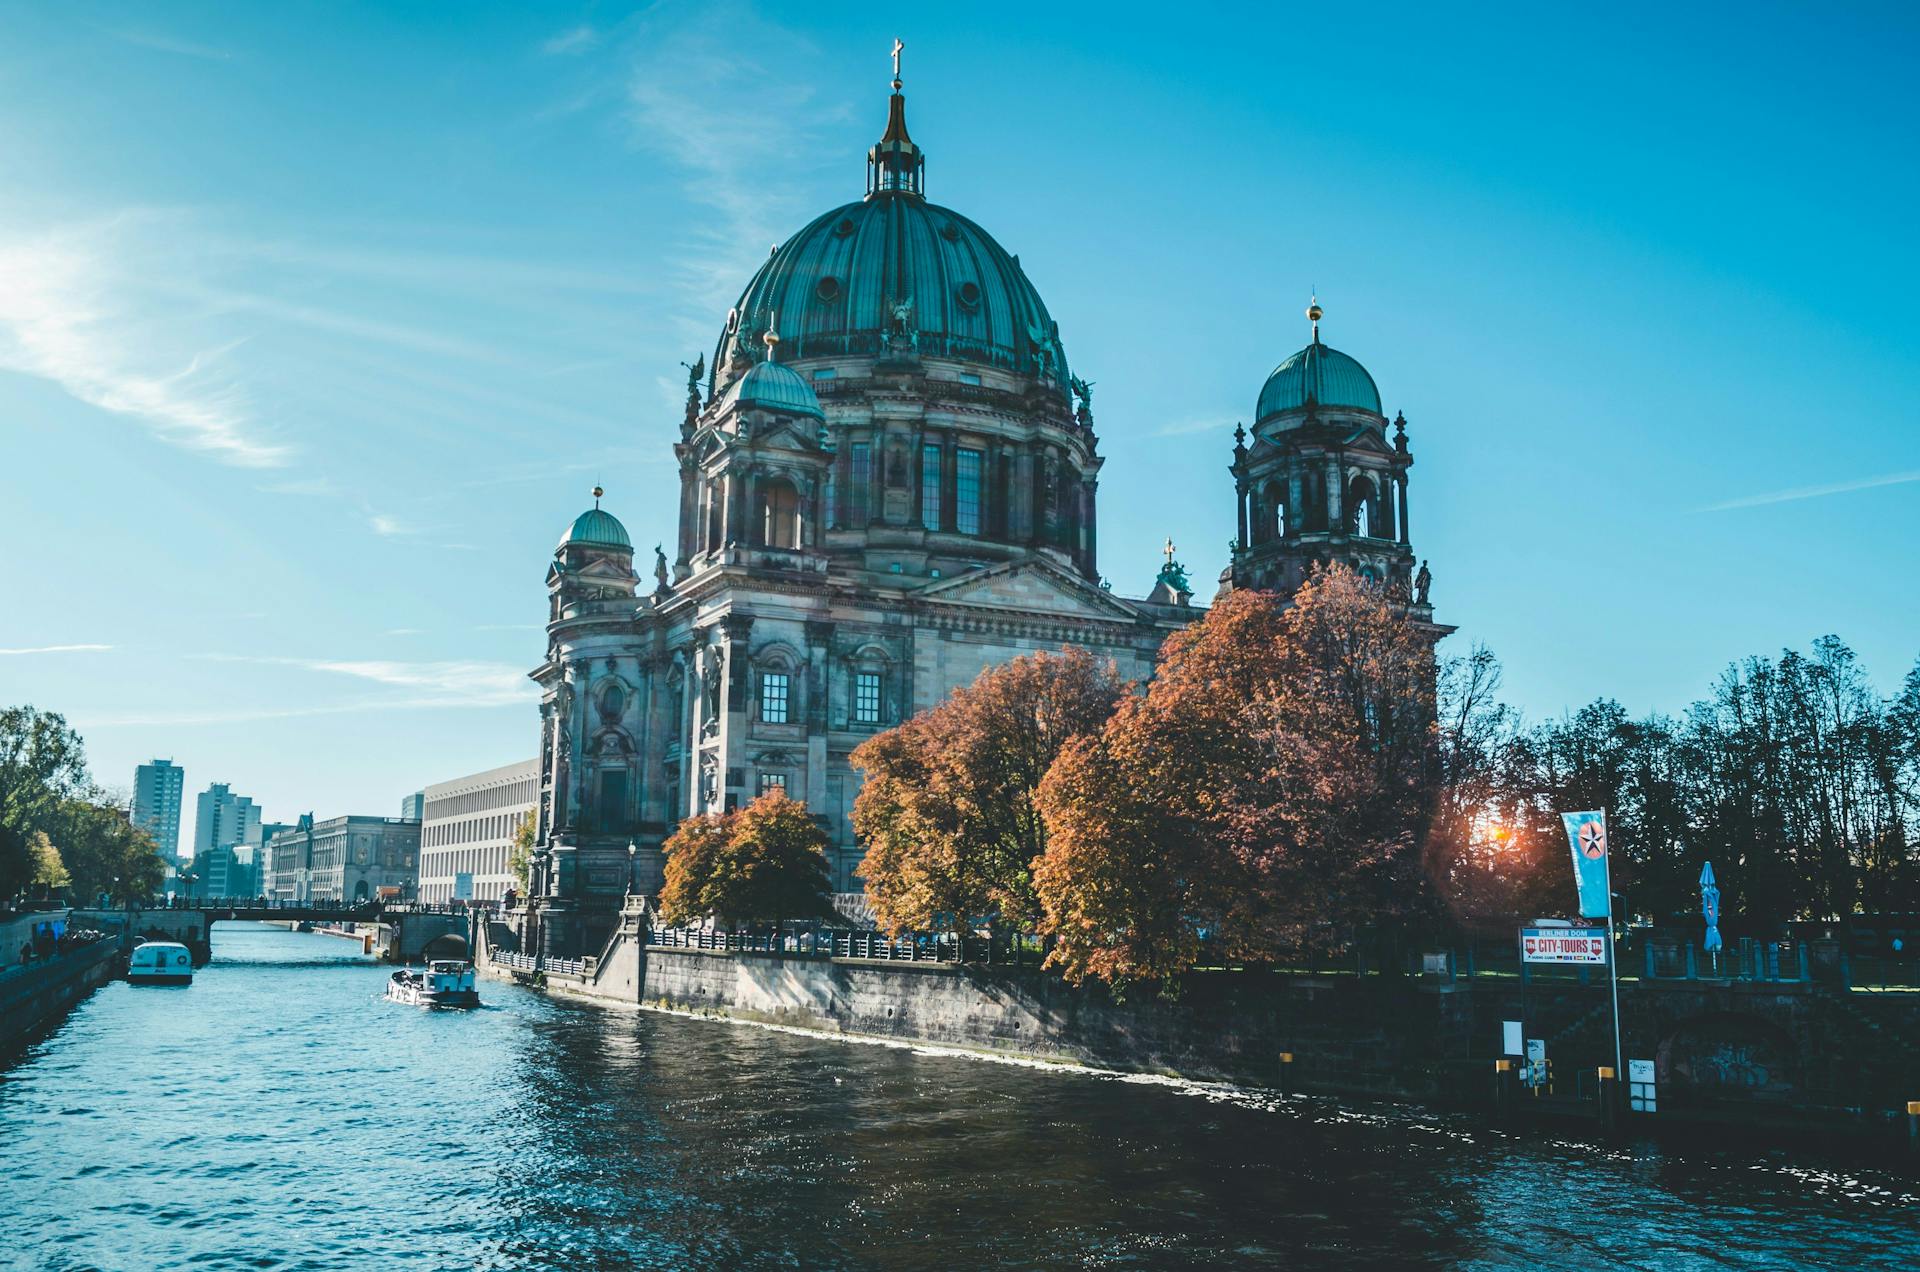 What to do in Berlin in a day?